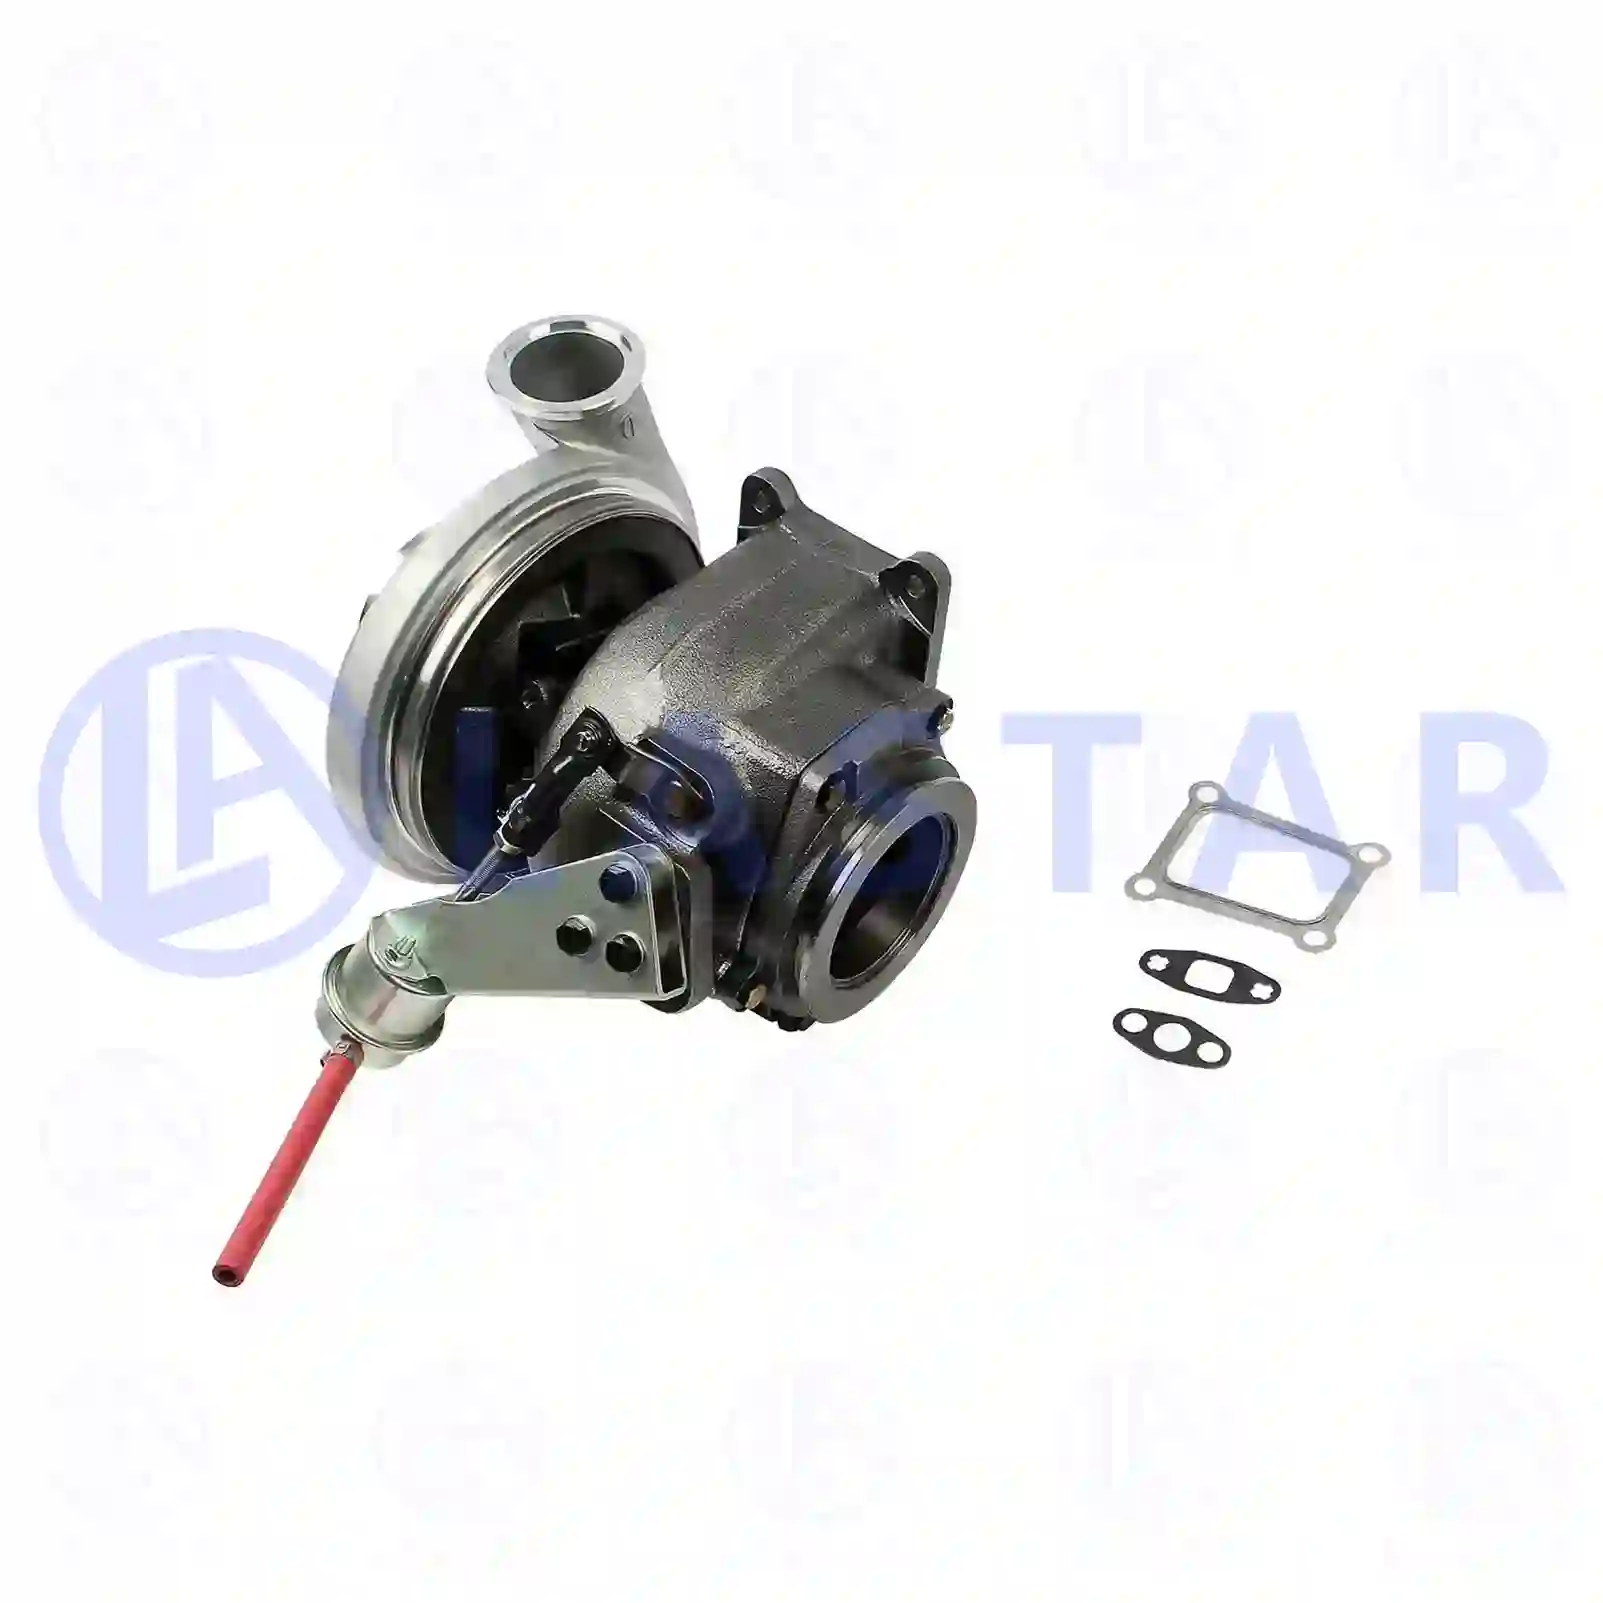 Turbocharger, with gasket kit, 77700917, 7421316560, 7485 ||  77700917 Lastar Spare Part | Truck Spare Parts, Auotomotive Spare Parts Turbocharger, with gasket kit, 77700917, 7421316560, 7485 ||  77700917 Lastar Spare Part | Truck Spare Parts, Auotomotive Spare Parts